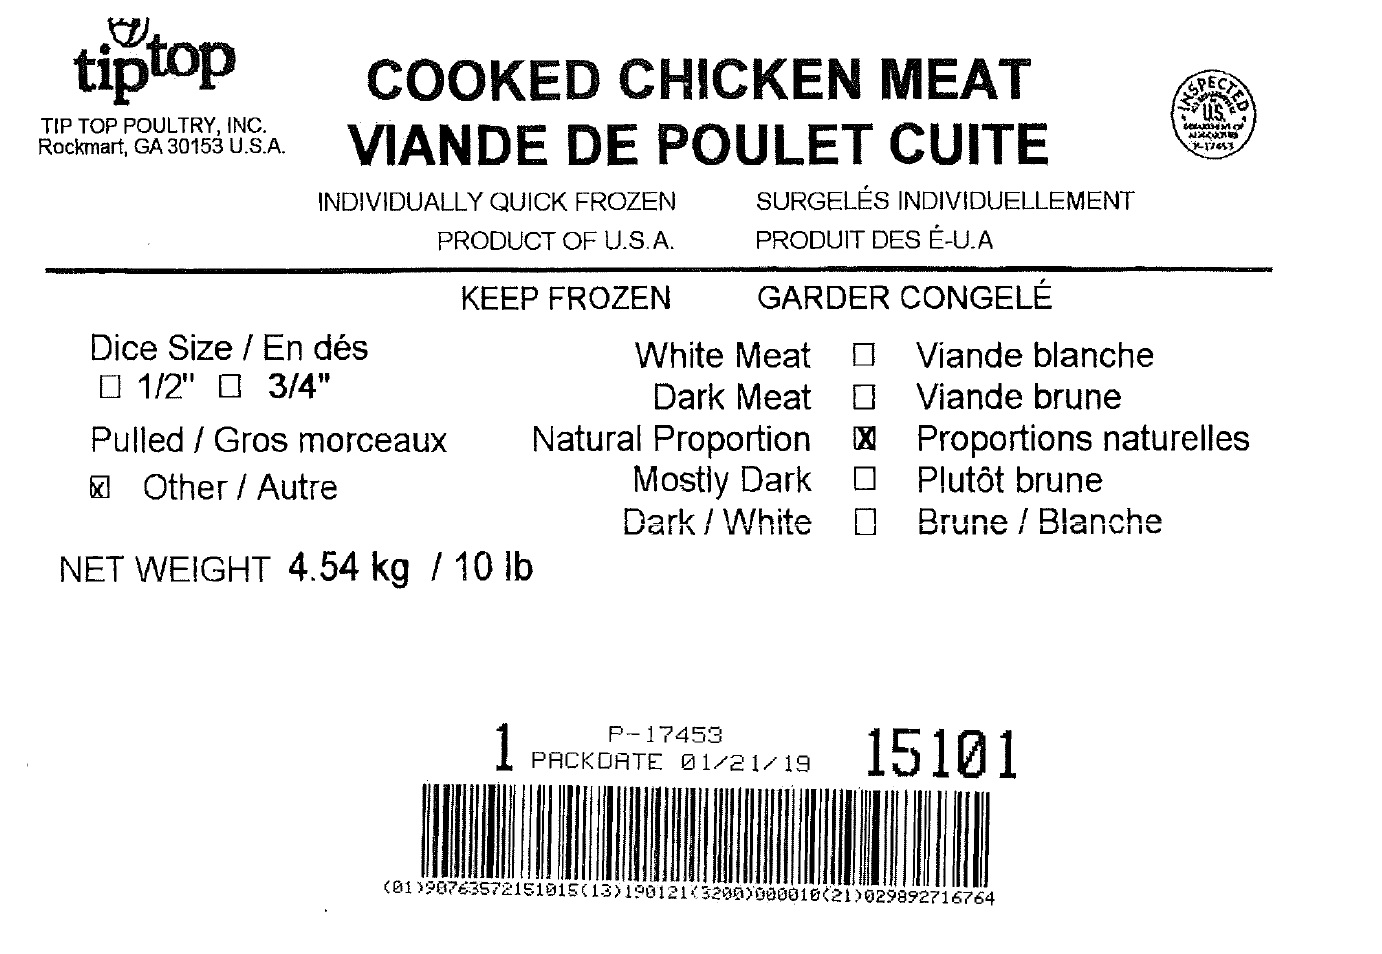 Tip Top Poultry, Inc. - Cooked Chicken Meat Natural Proportion (#15101)